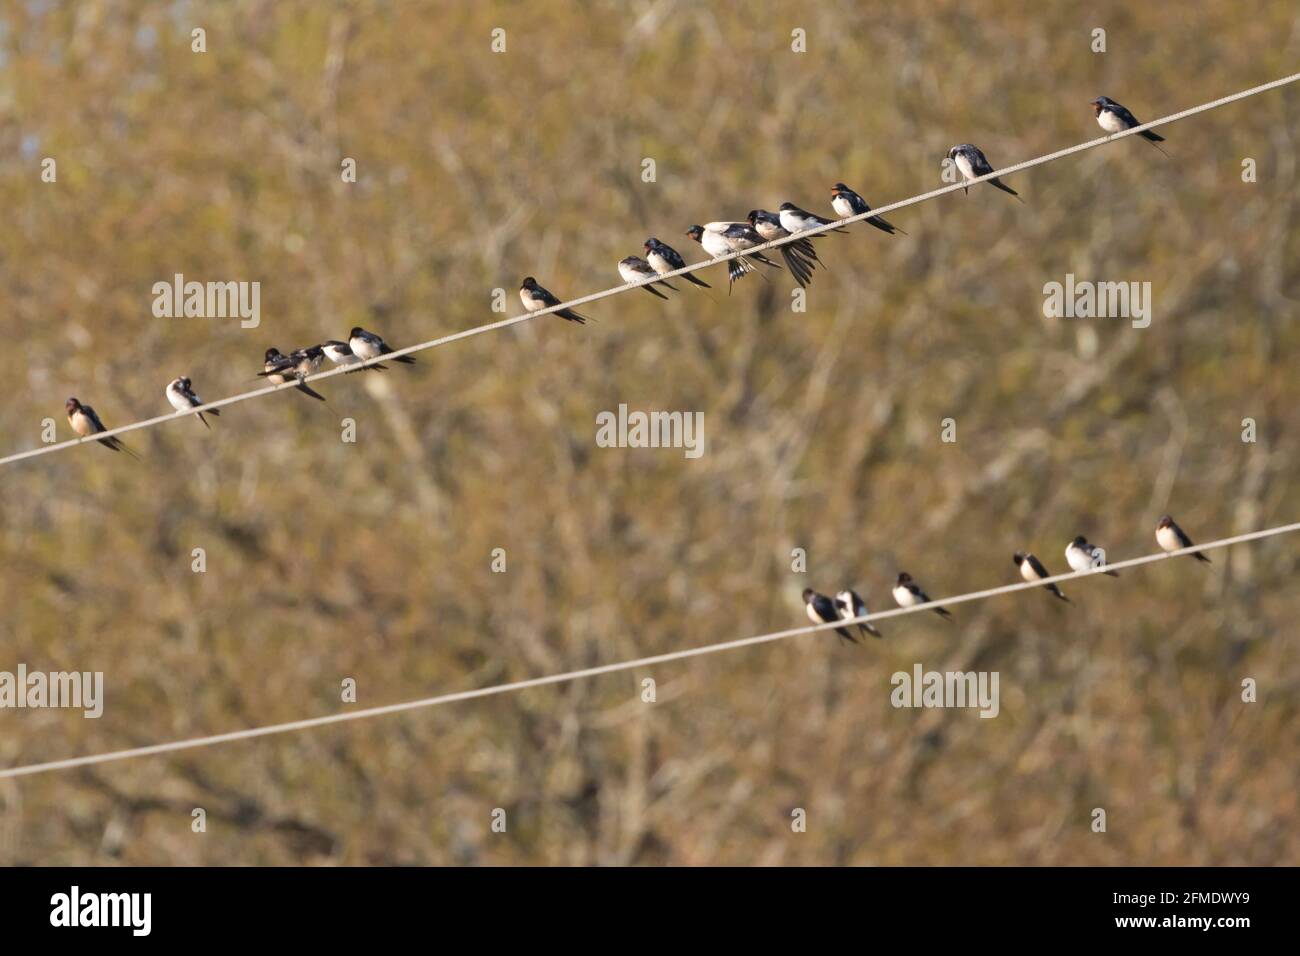 Swallows (Hirundo rustica) and house martins (Delichon urbicum) perched on wire during spring migration. Sussex, UK. Stock Photo